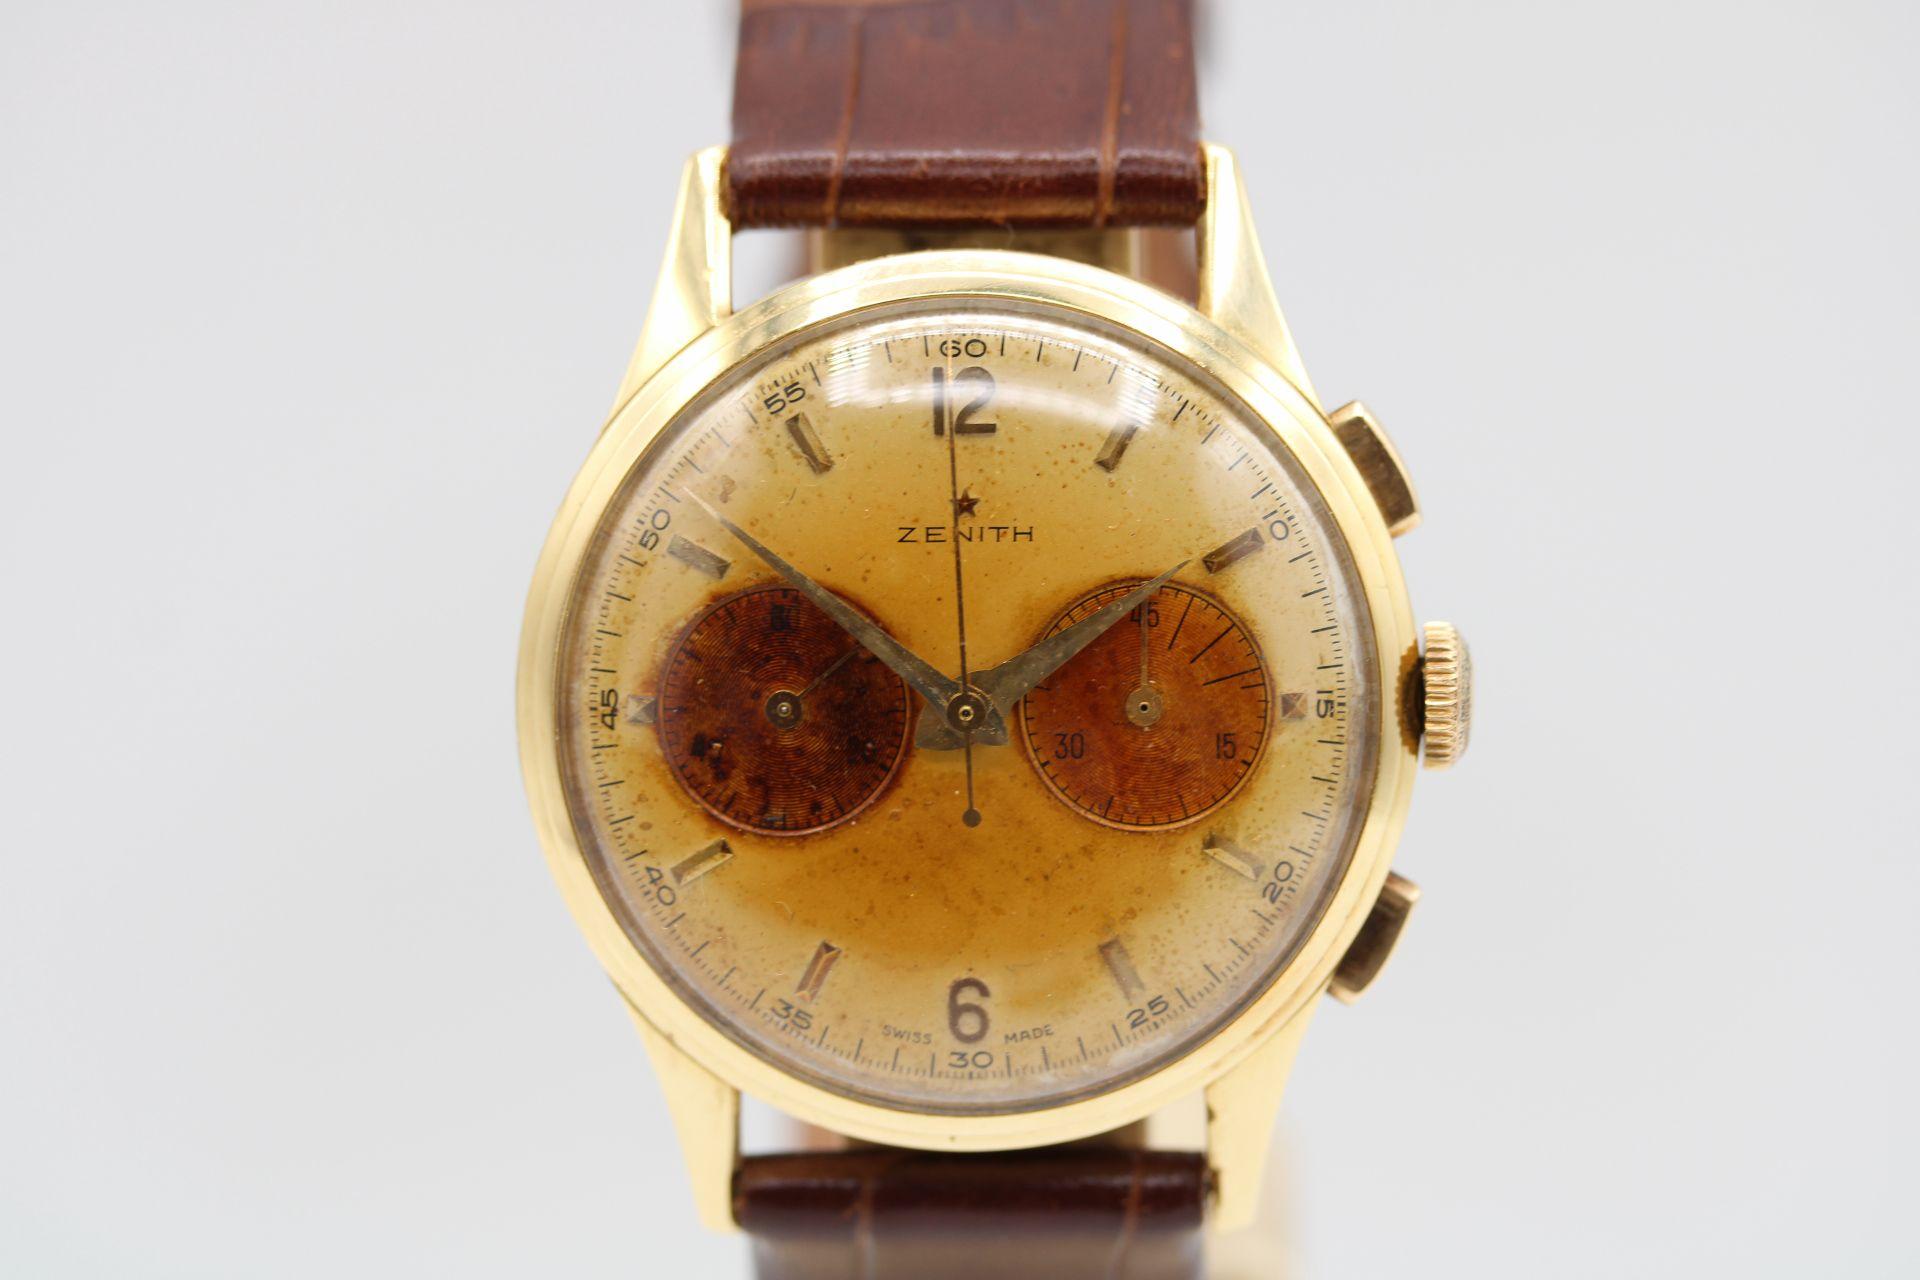 What a truly stunning vintage Zenith Chronograph that is signed throughout and in a completely unrestored and original state with the dial going a natural tropical colour in a process that can only occur naturally over time.

This watch is from the